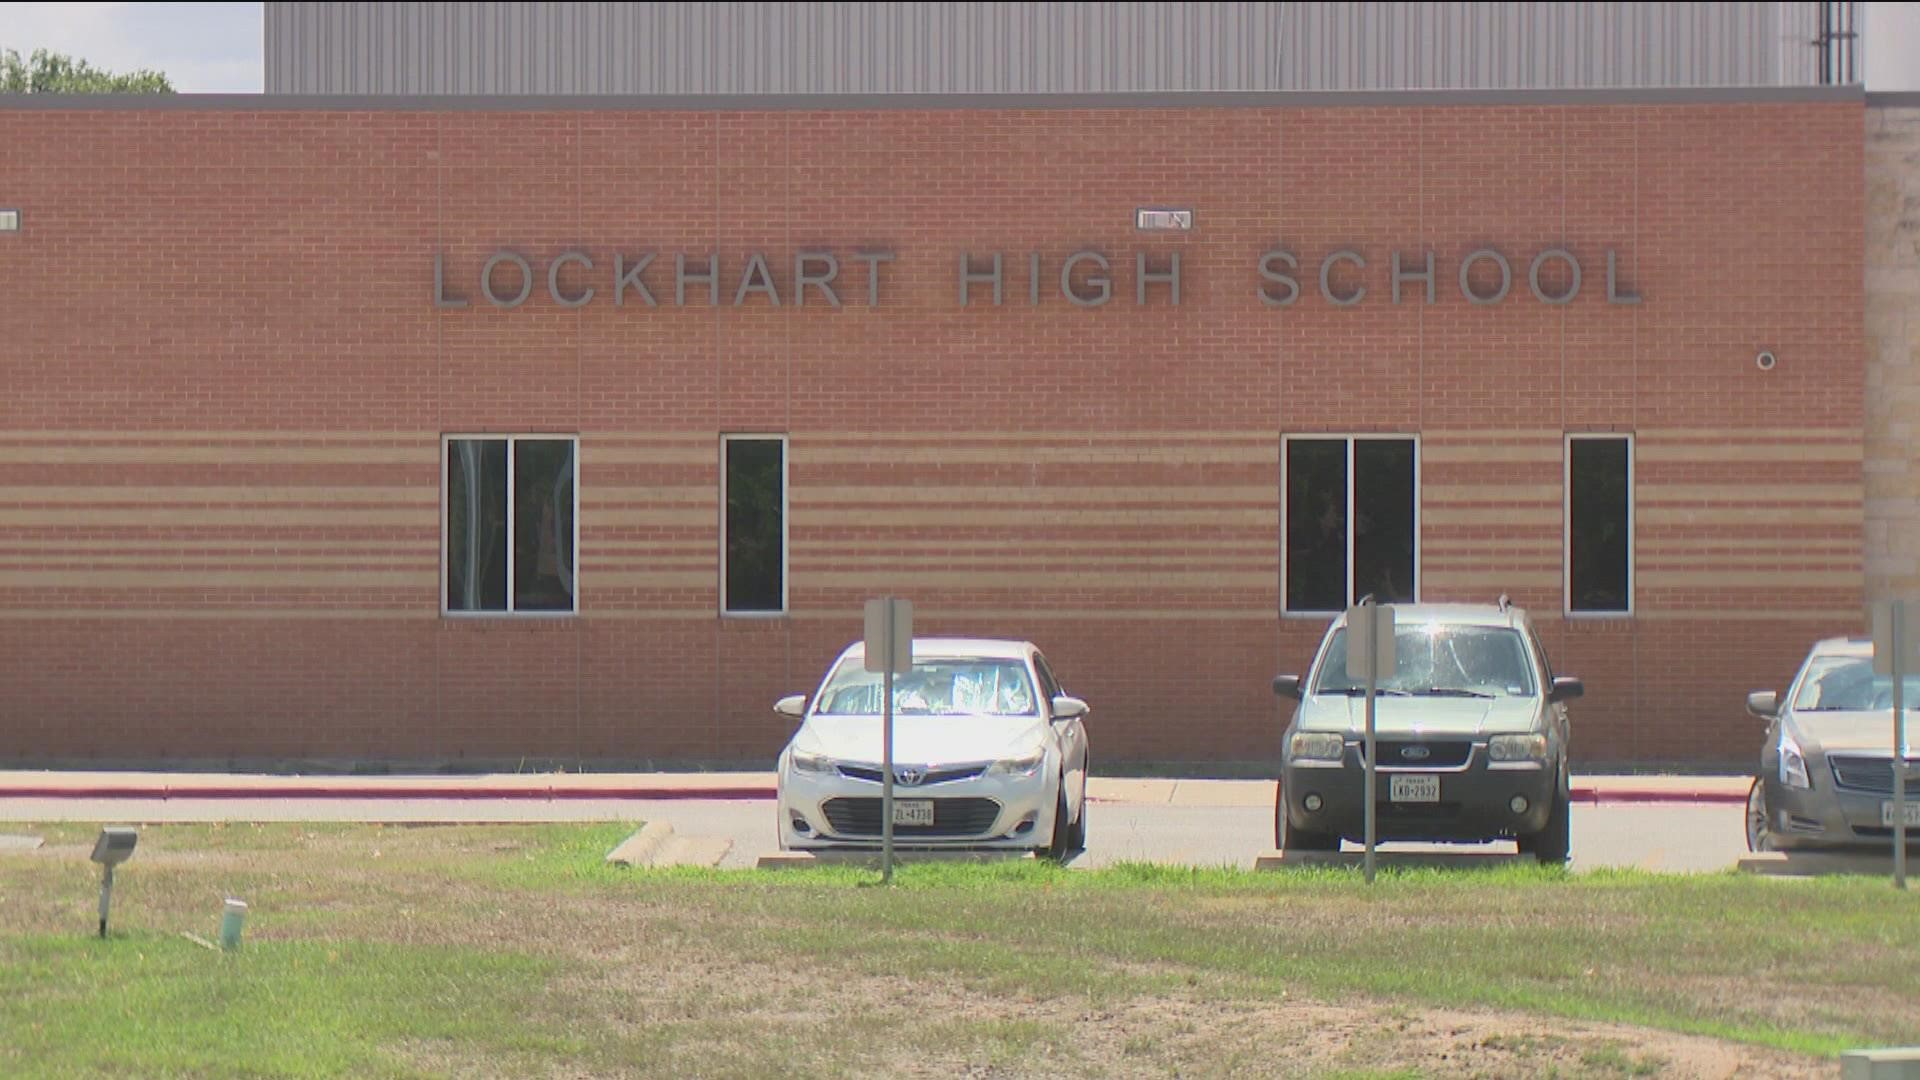 Three more teenage students have been arrested in a case involving a threat written on a bathroom wall.